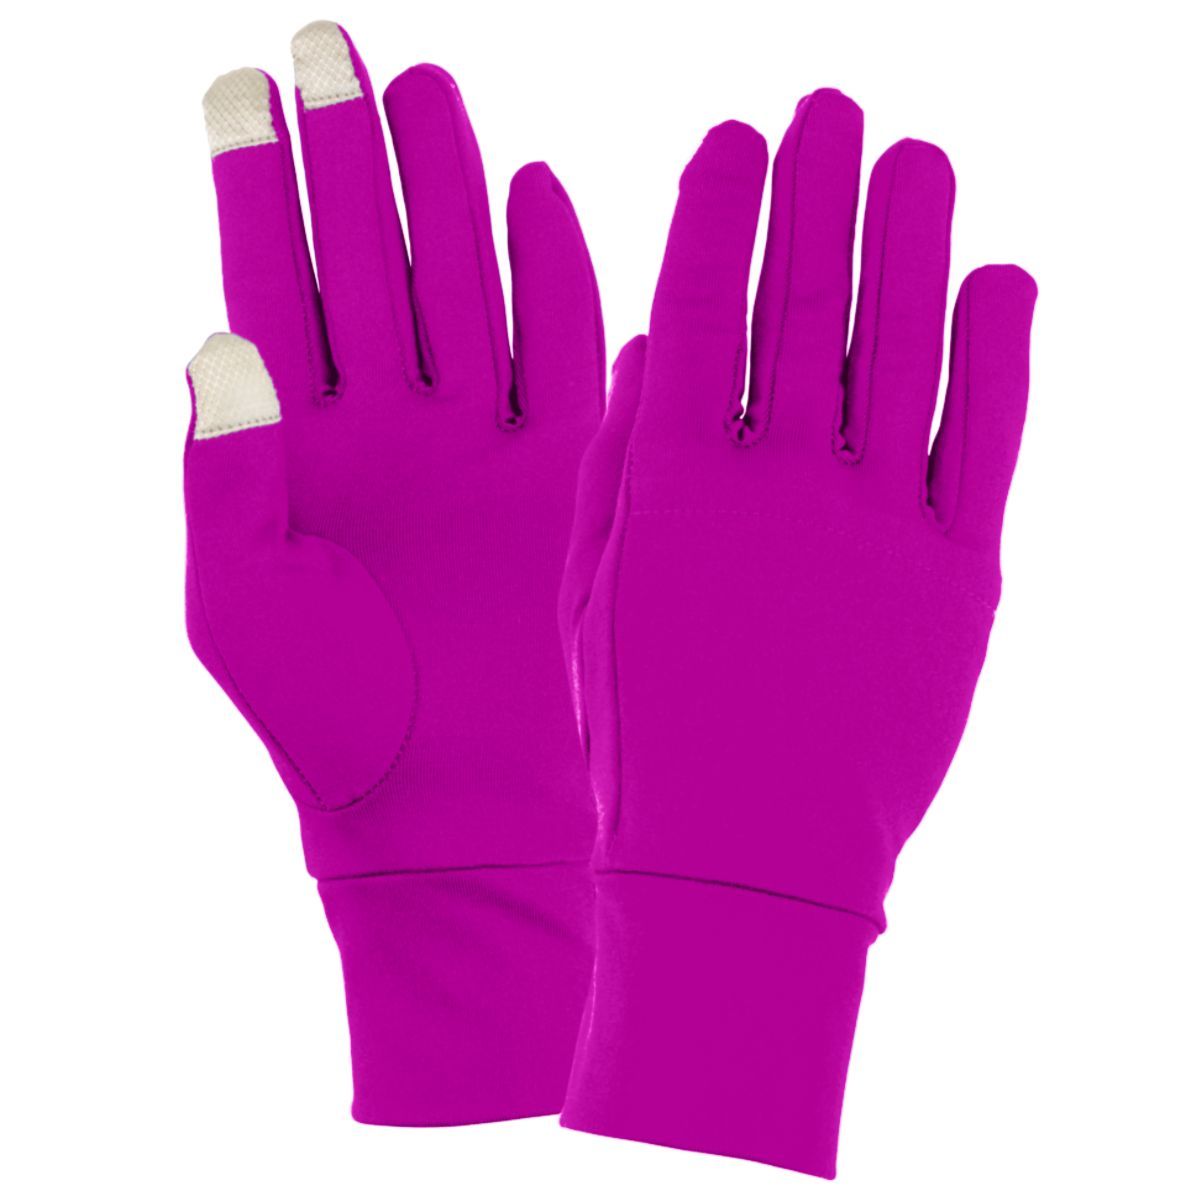 Augusta Sportswear Tech Gloves in Power Pink  -Part of the Accessories, Augusta-Products, Accessories-Gloves product lines at KanaleyCreations.com